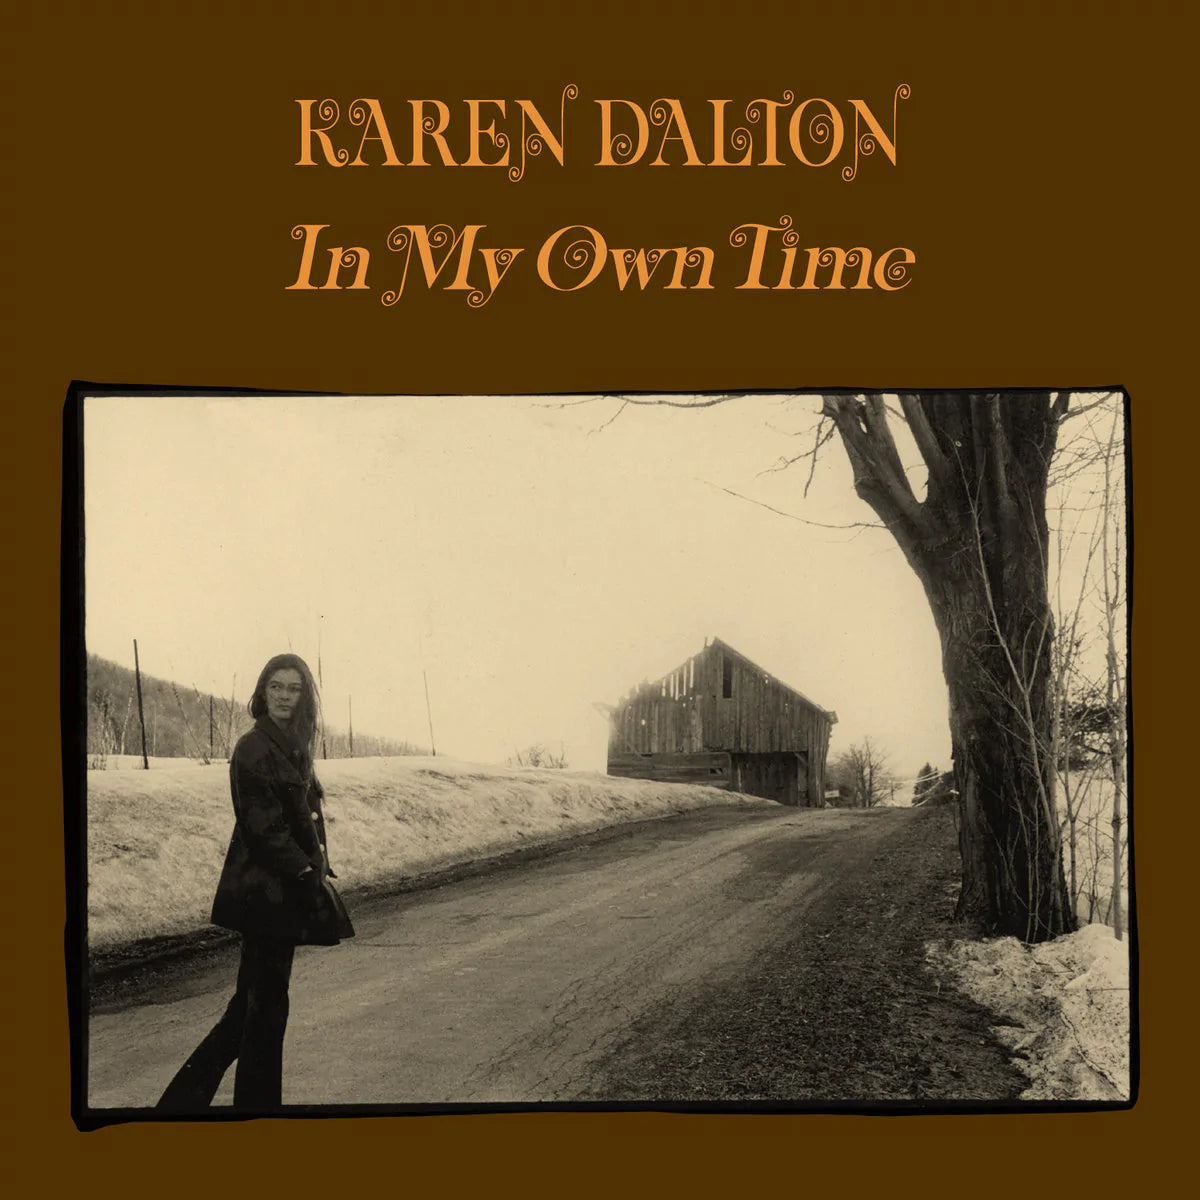 Karen Dalton – In My Own Time: 50th Anniversary Deluxe Edition 2LP (180g, Two Bonus 7" Singles, 20 Page Booklet, Trifold Sleeve)